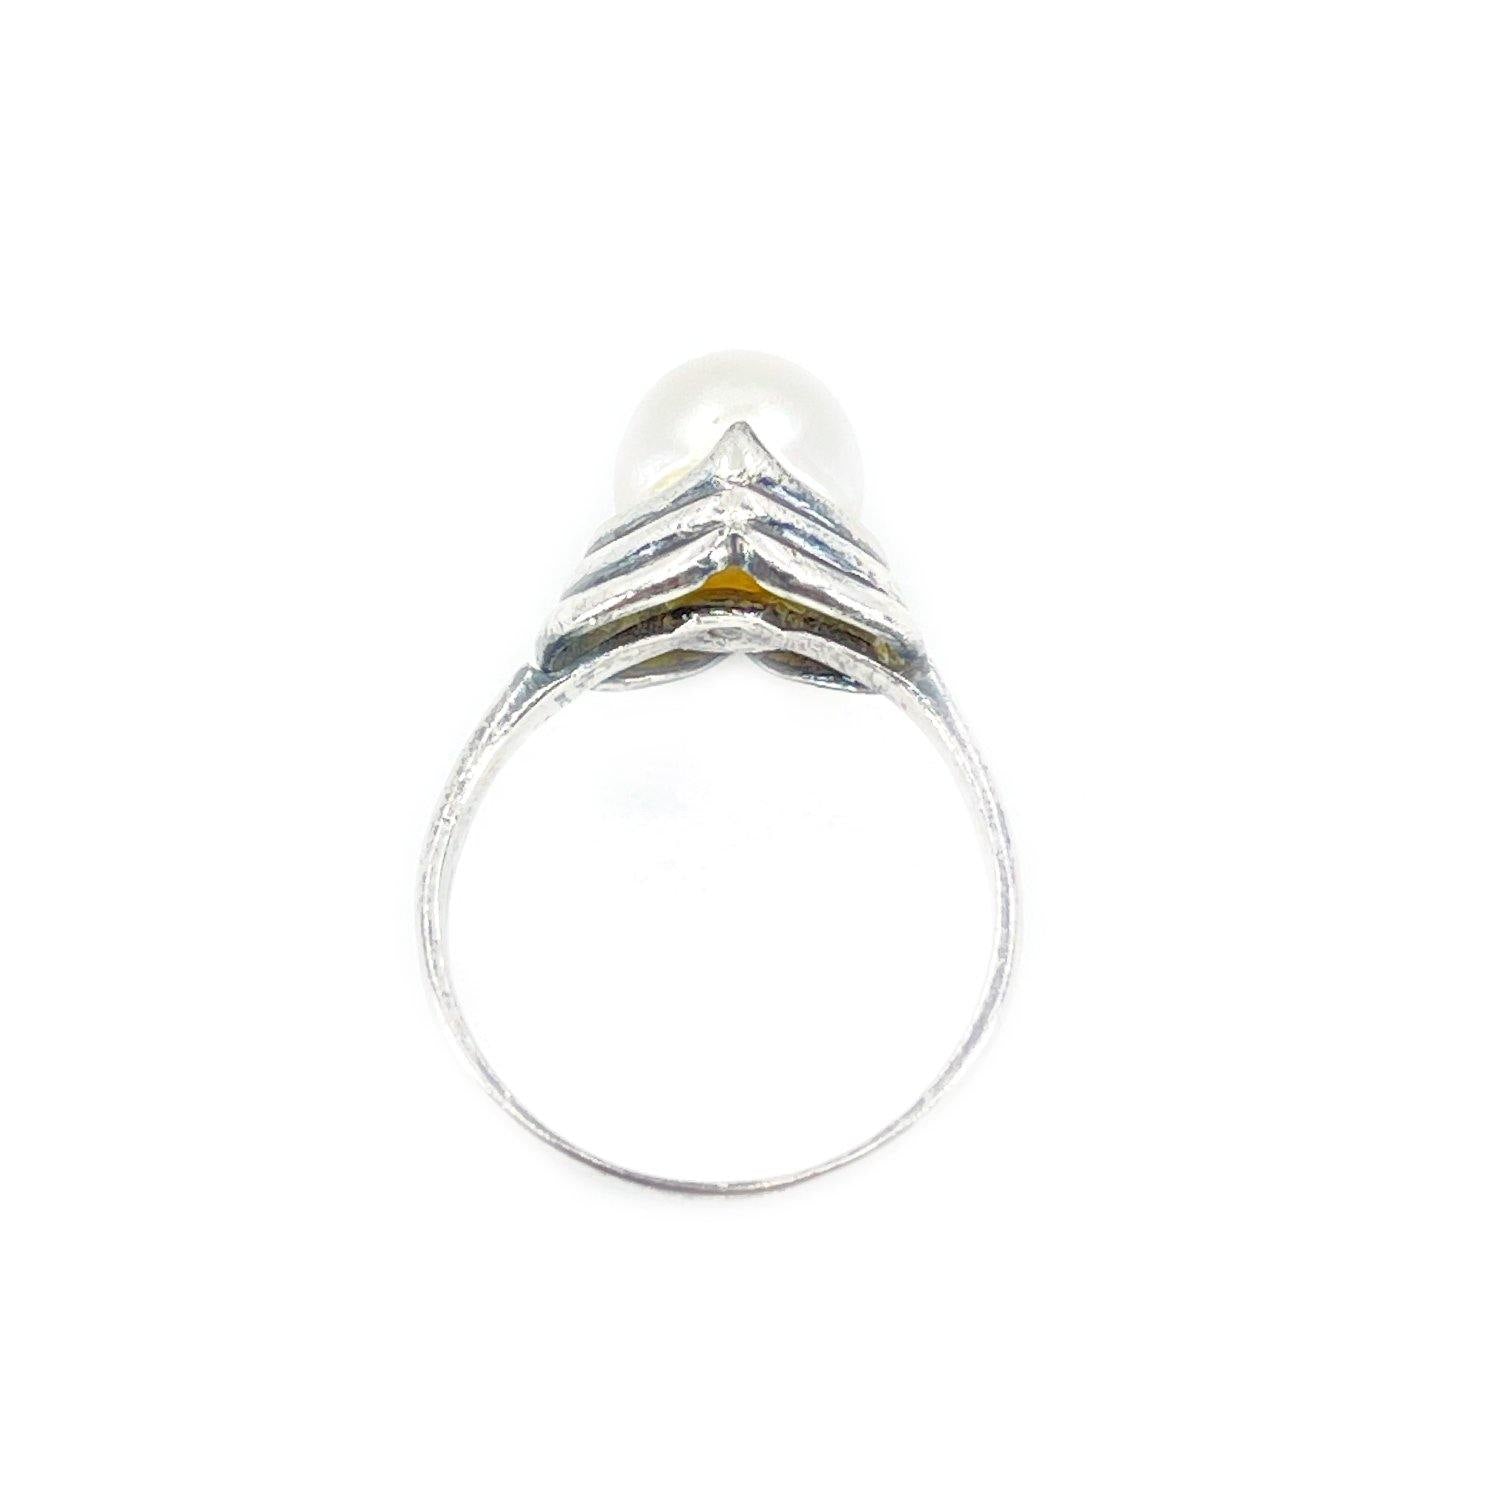 Art Deco Japanese Saltwater Akoya Cultured Pearl Ring- Sterling Silver Sz 5